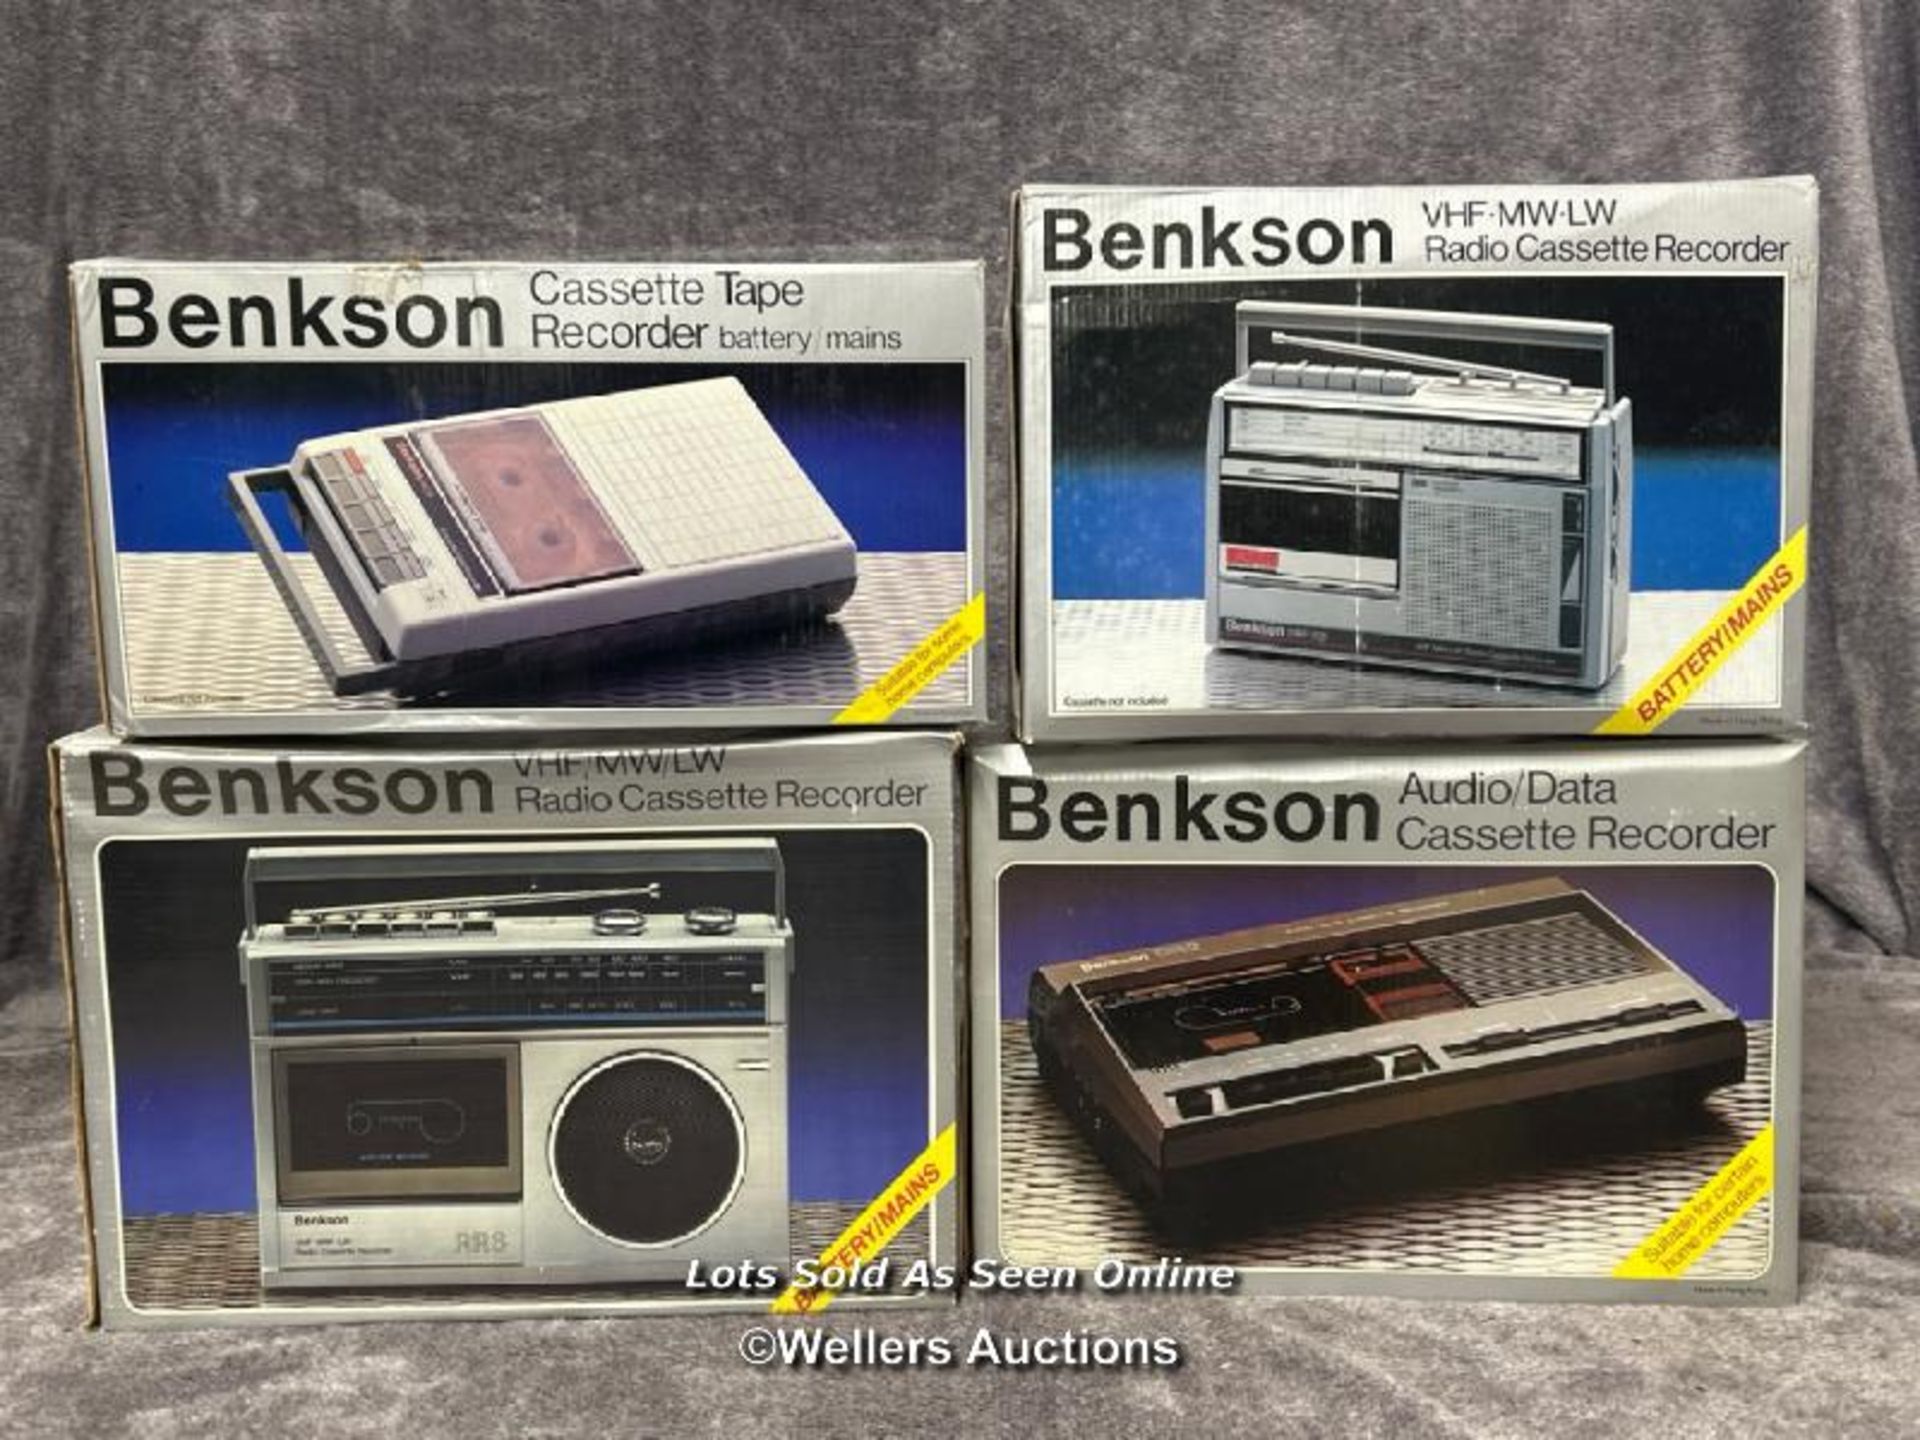 Four boxed Benkson cassette recorders and radios, from the private collection of the founder of